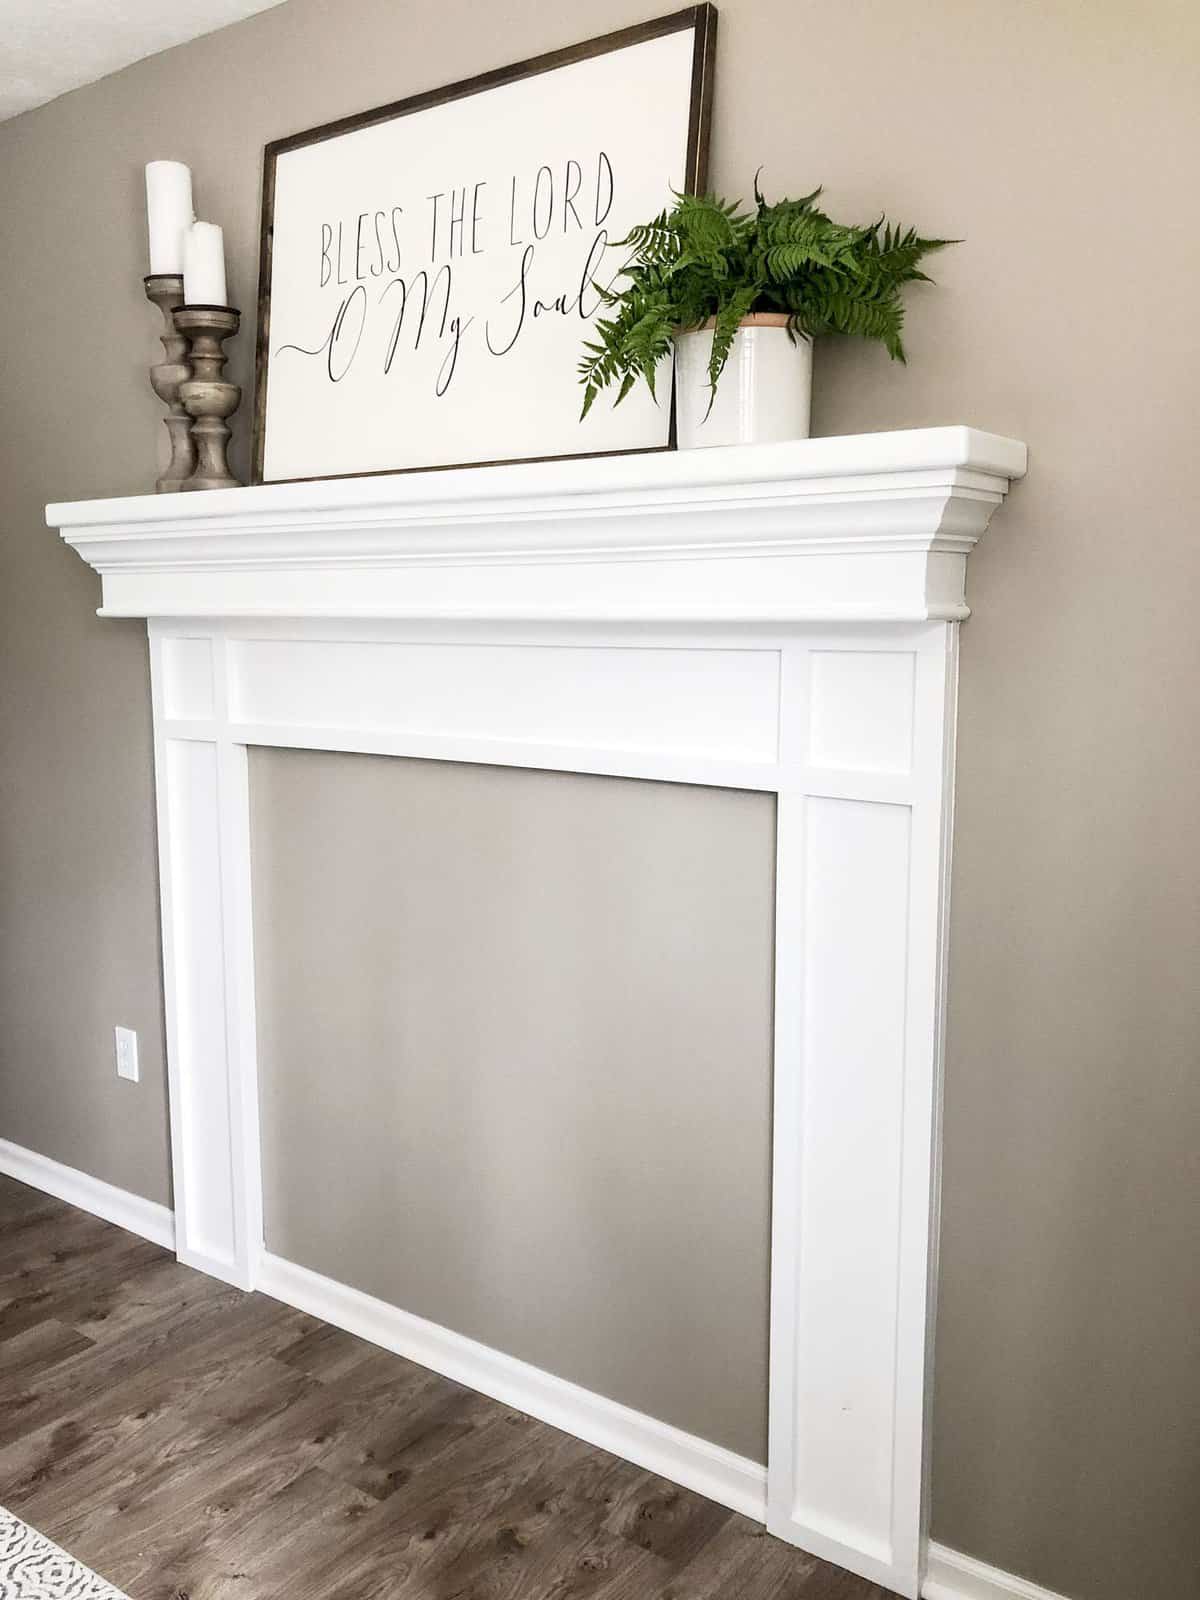 Diy Faux Fireplace Mantel Tutorial, Building A Fireplace Surround And Mantel